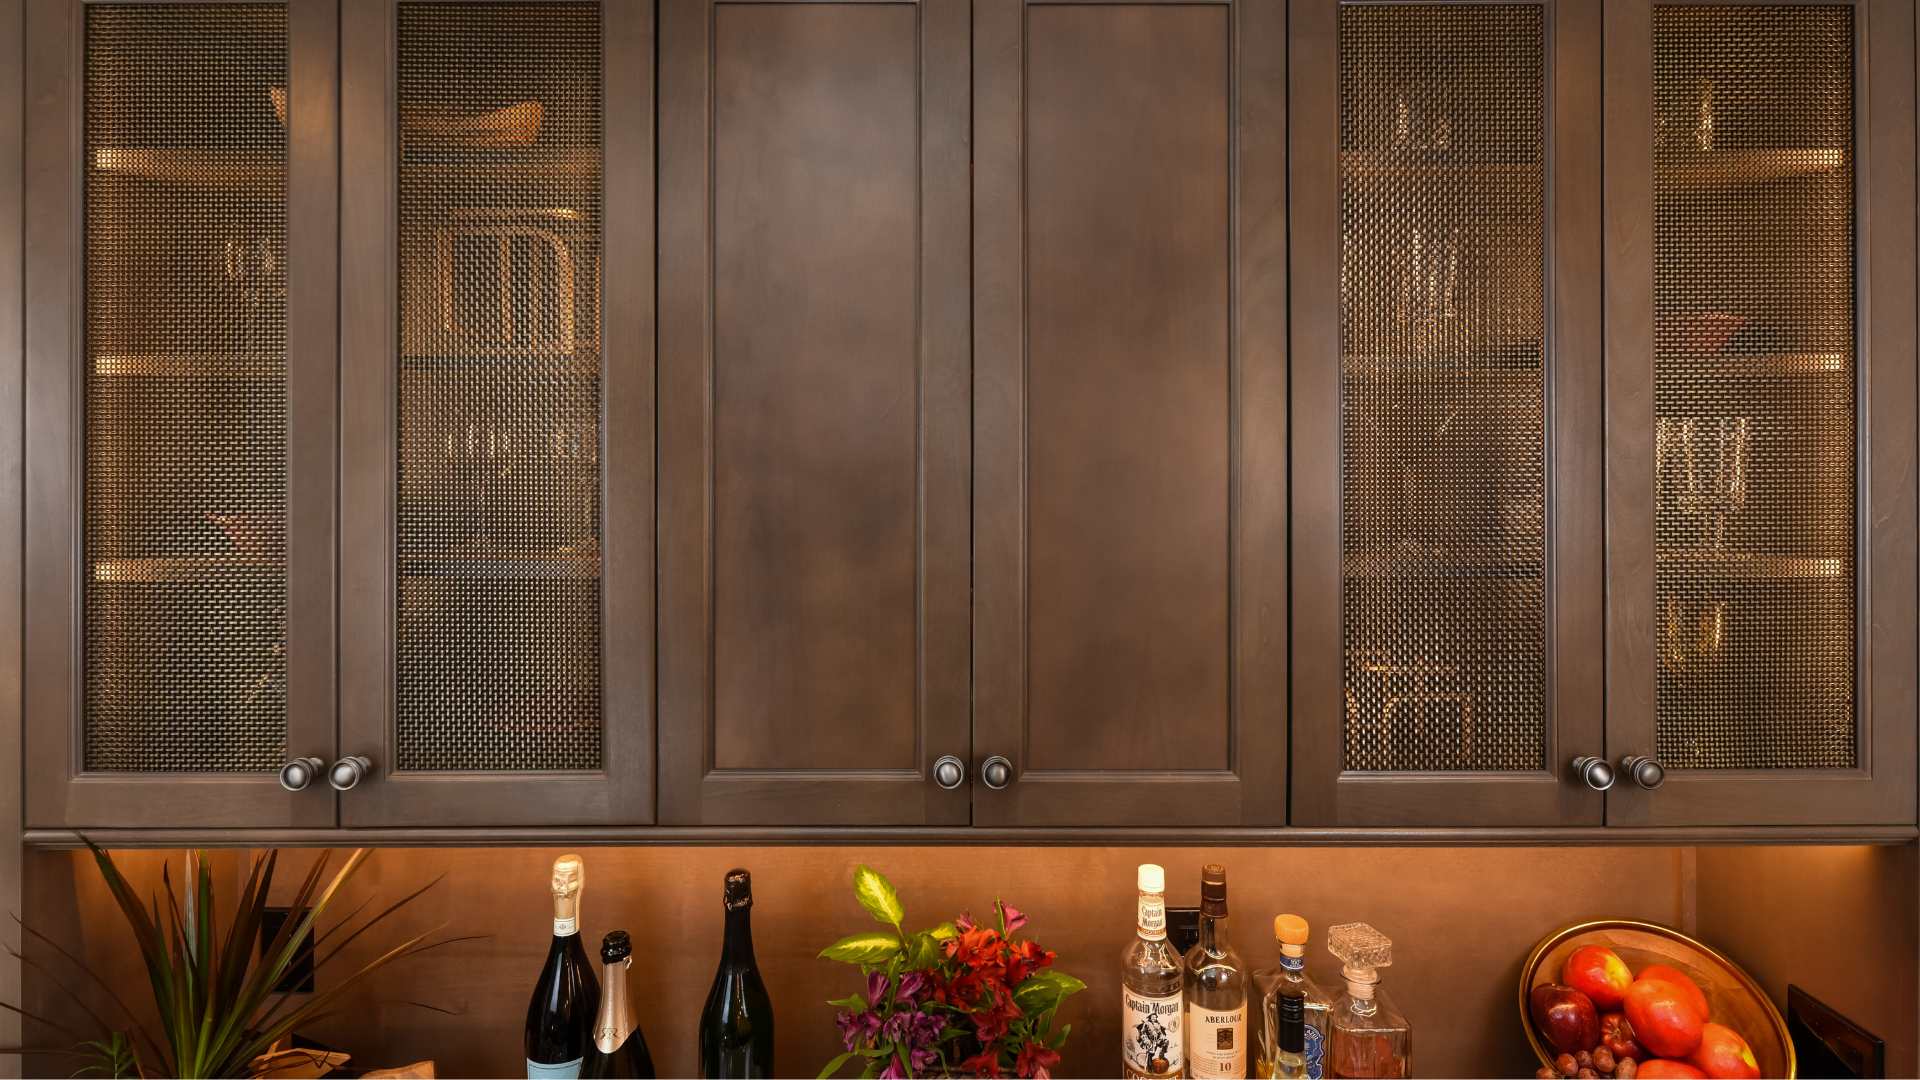 Wet bar that has dark wood cabinets as well as brass cabinet door inserts and under-cabinet lighting.